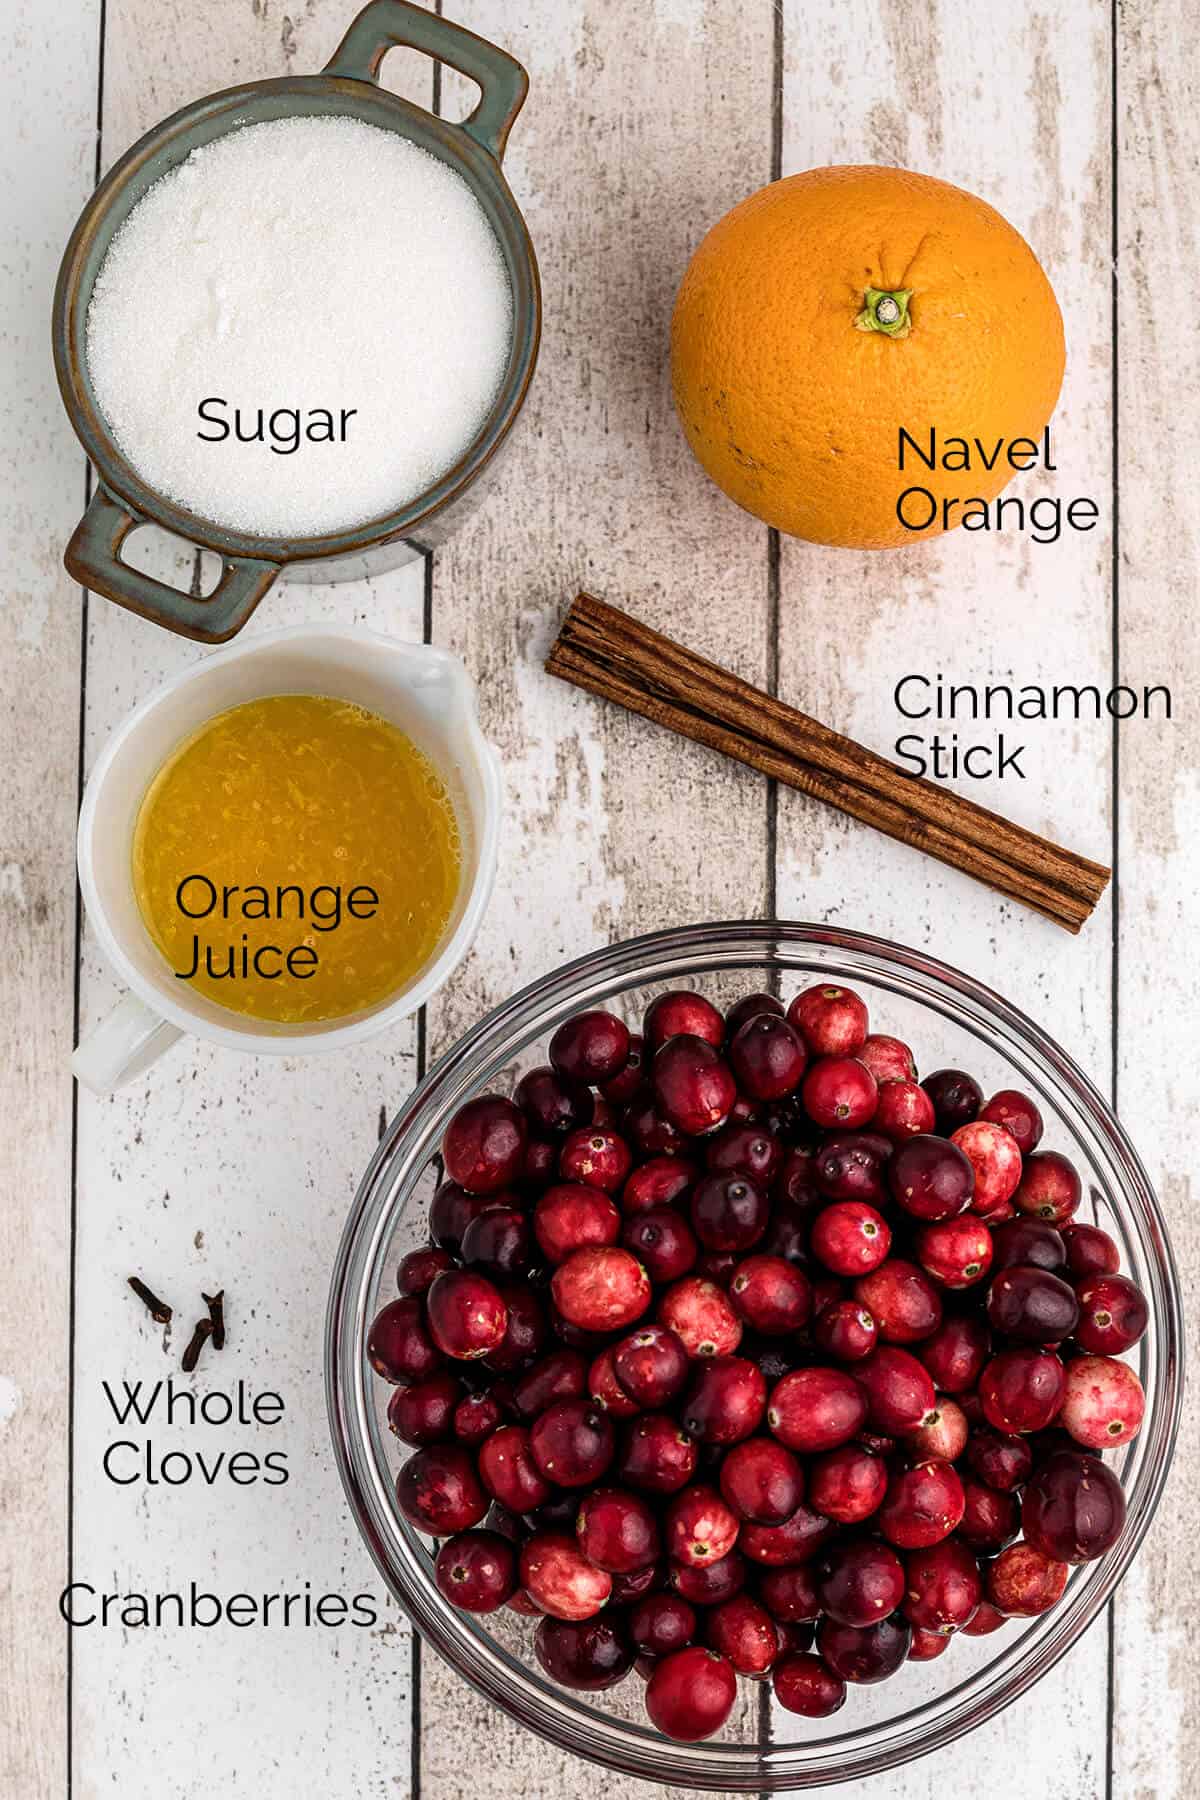 All ingredients needed to make cranberry orange sauce.